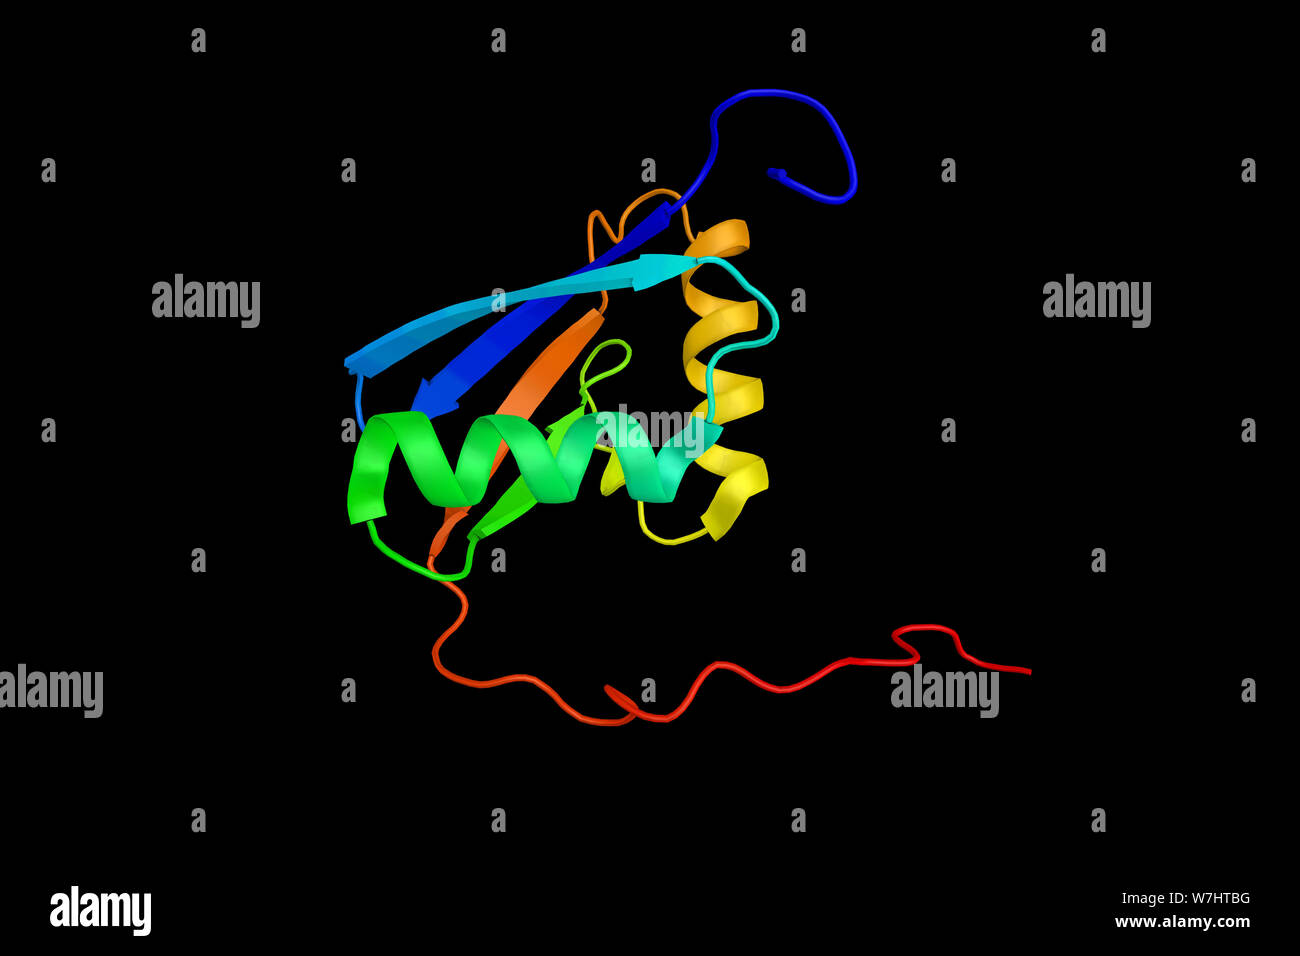 Mitogen-activated protein kinase kinase kinase 2, an enzyme which preferentially activates other kinases involved in the MAP kinase signaling pathway. Stock Photo